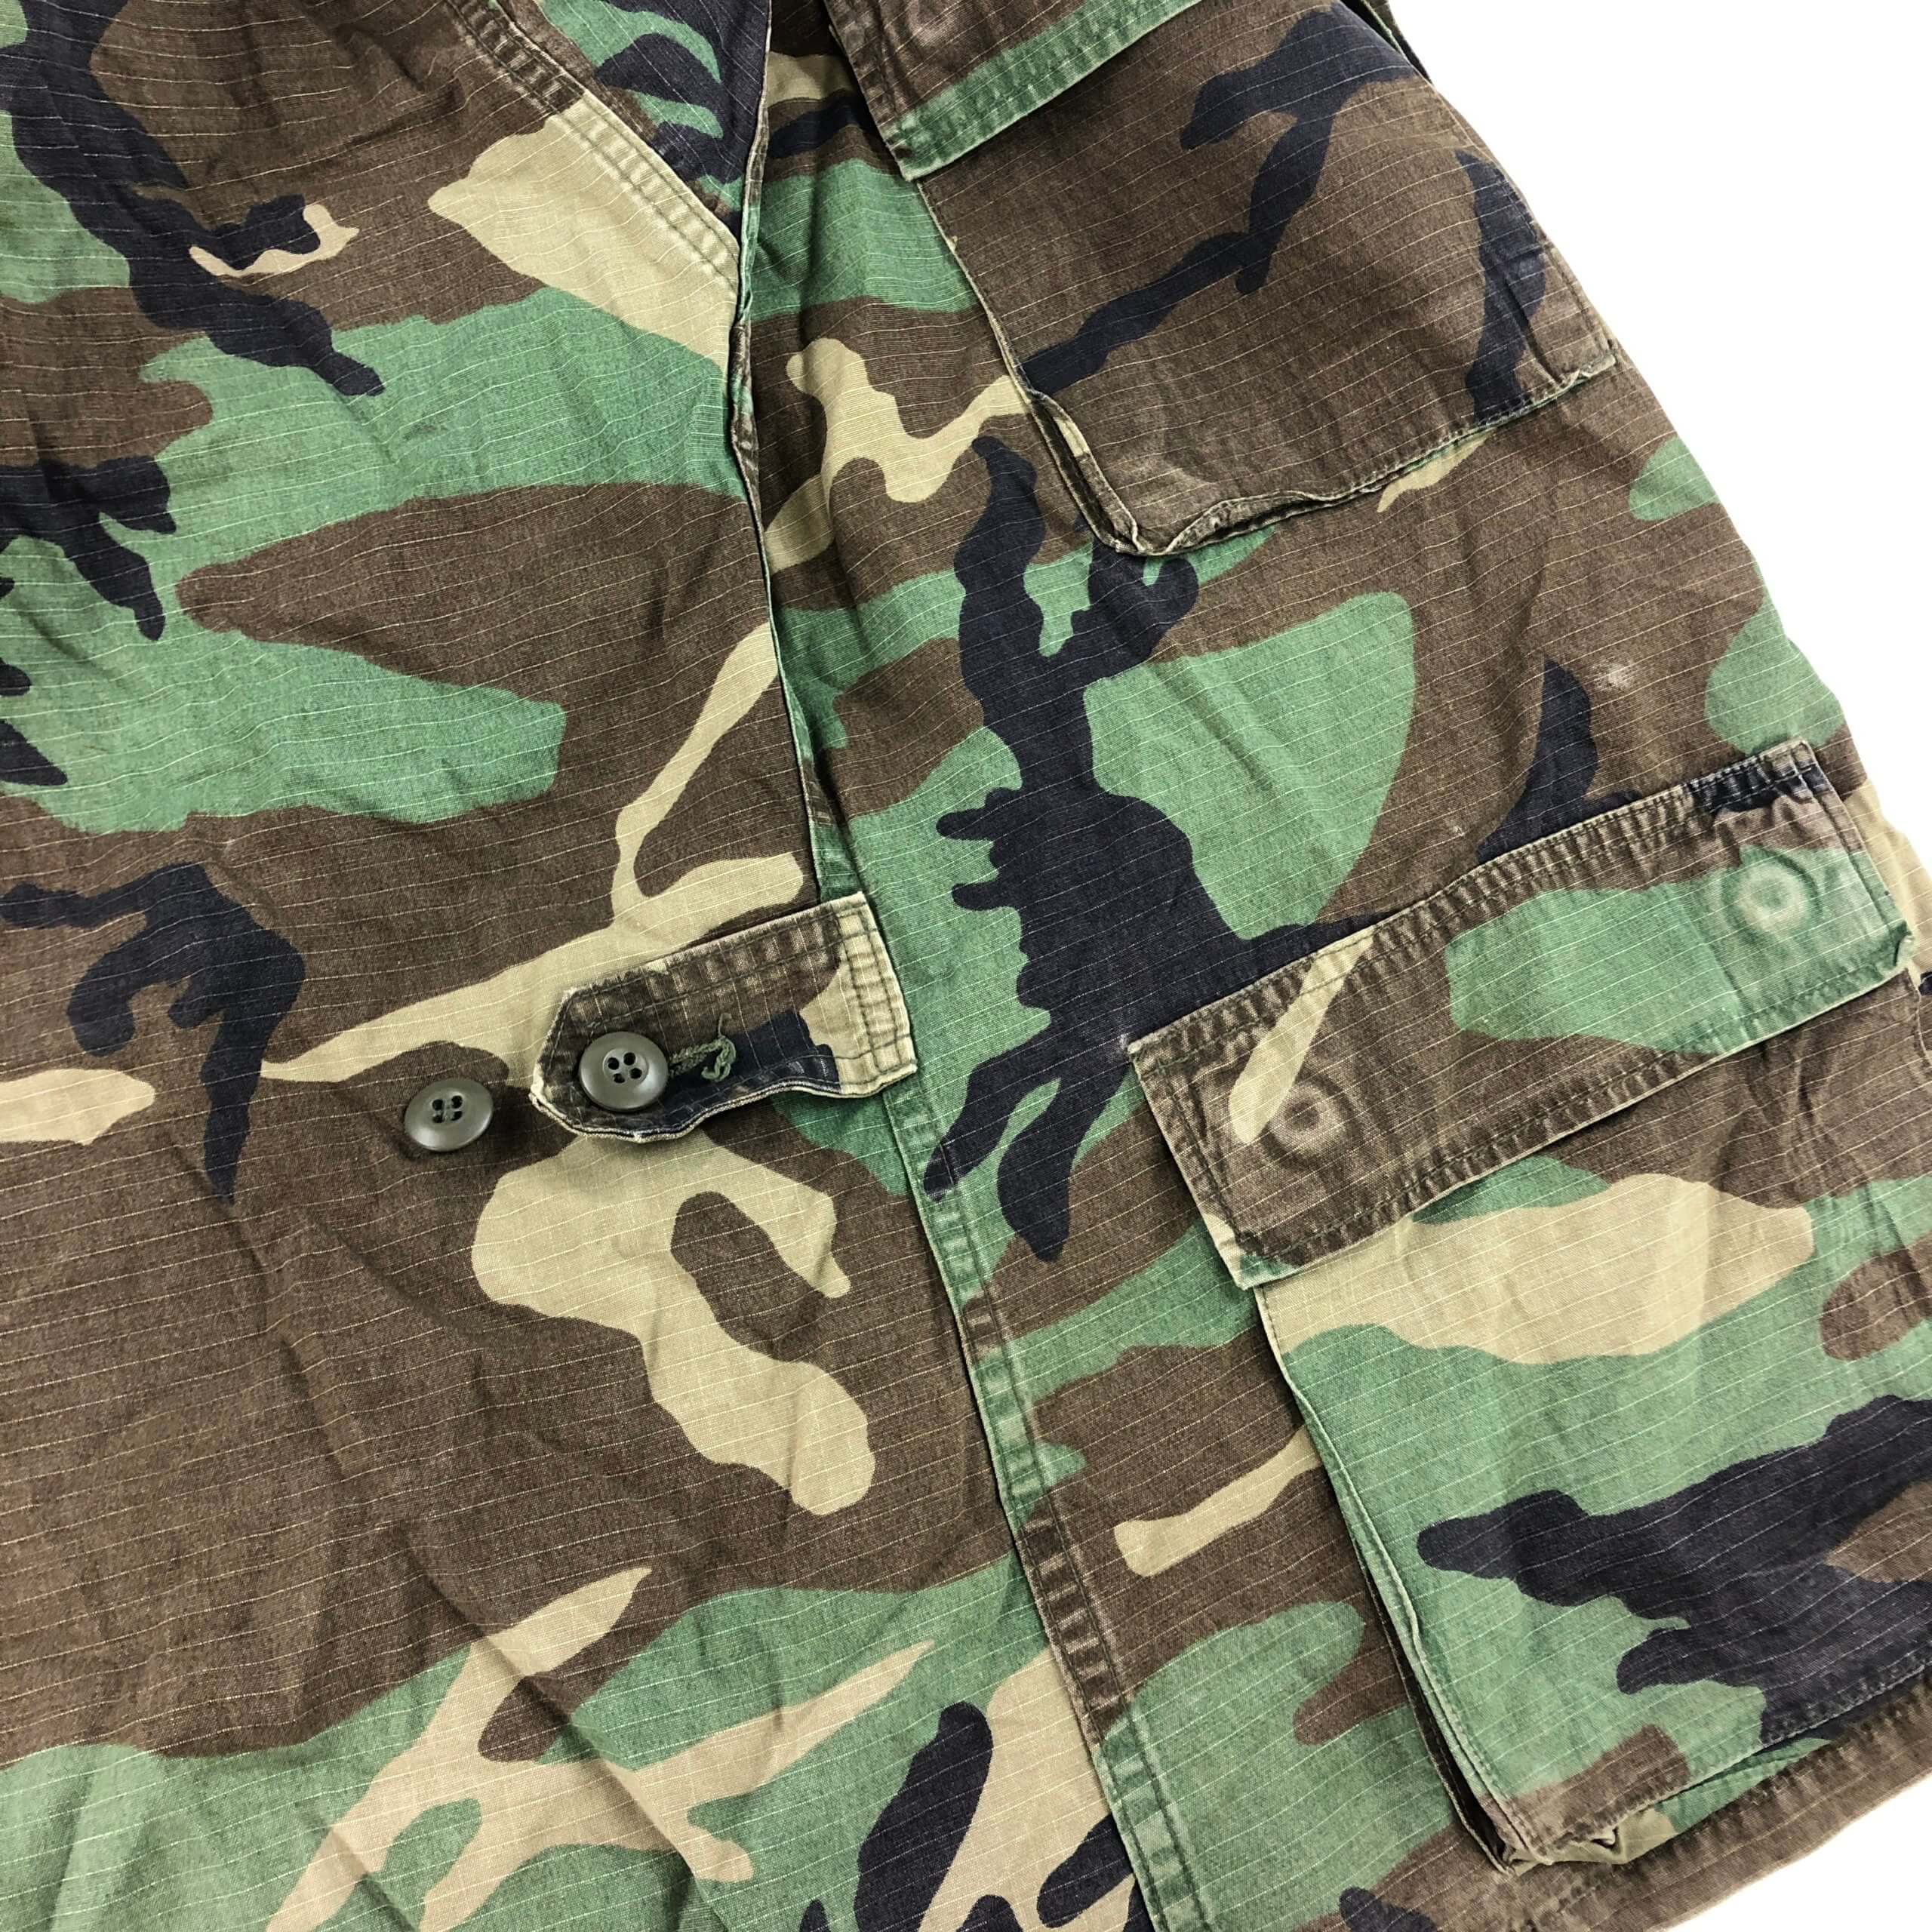 Details about   Coat Hot Weather Woodland Camo Pattern Combat Military BDU Small Regular R15C 